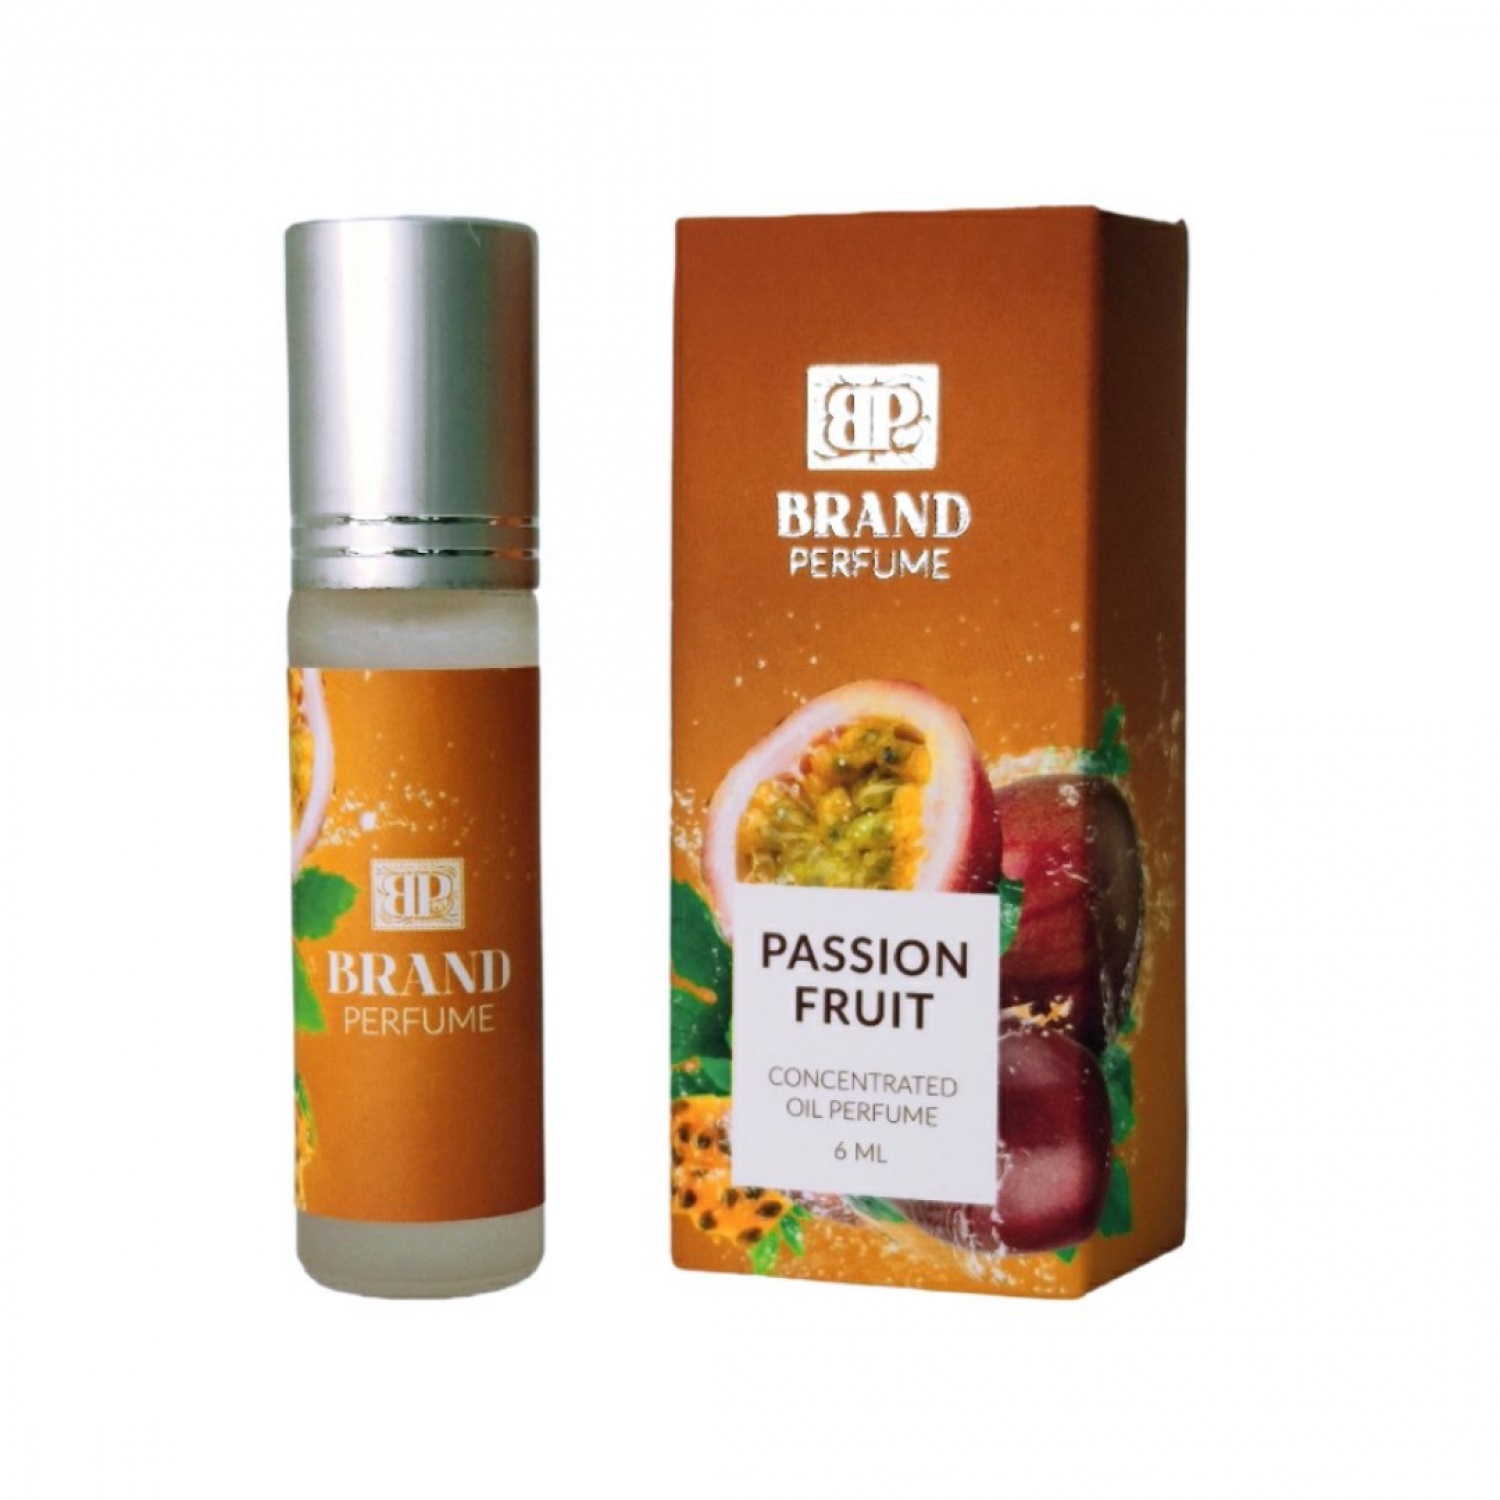 PASSION FRUIT Concentrated Oil Perfume, Brand Perfume (Концентрированные масляные духи), ролик, 6 мл.